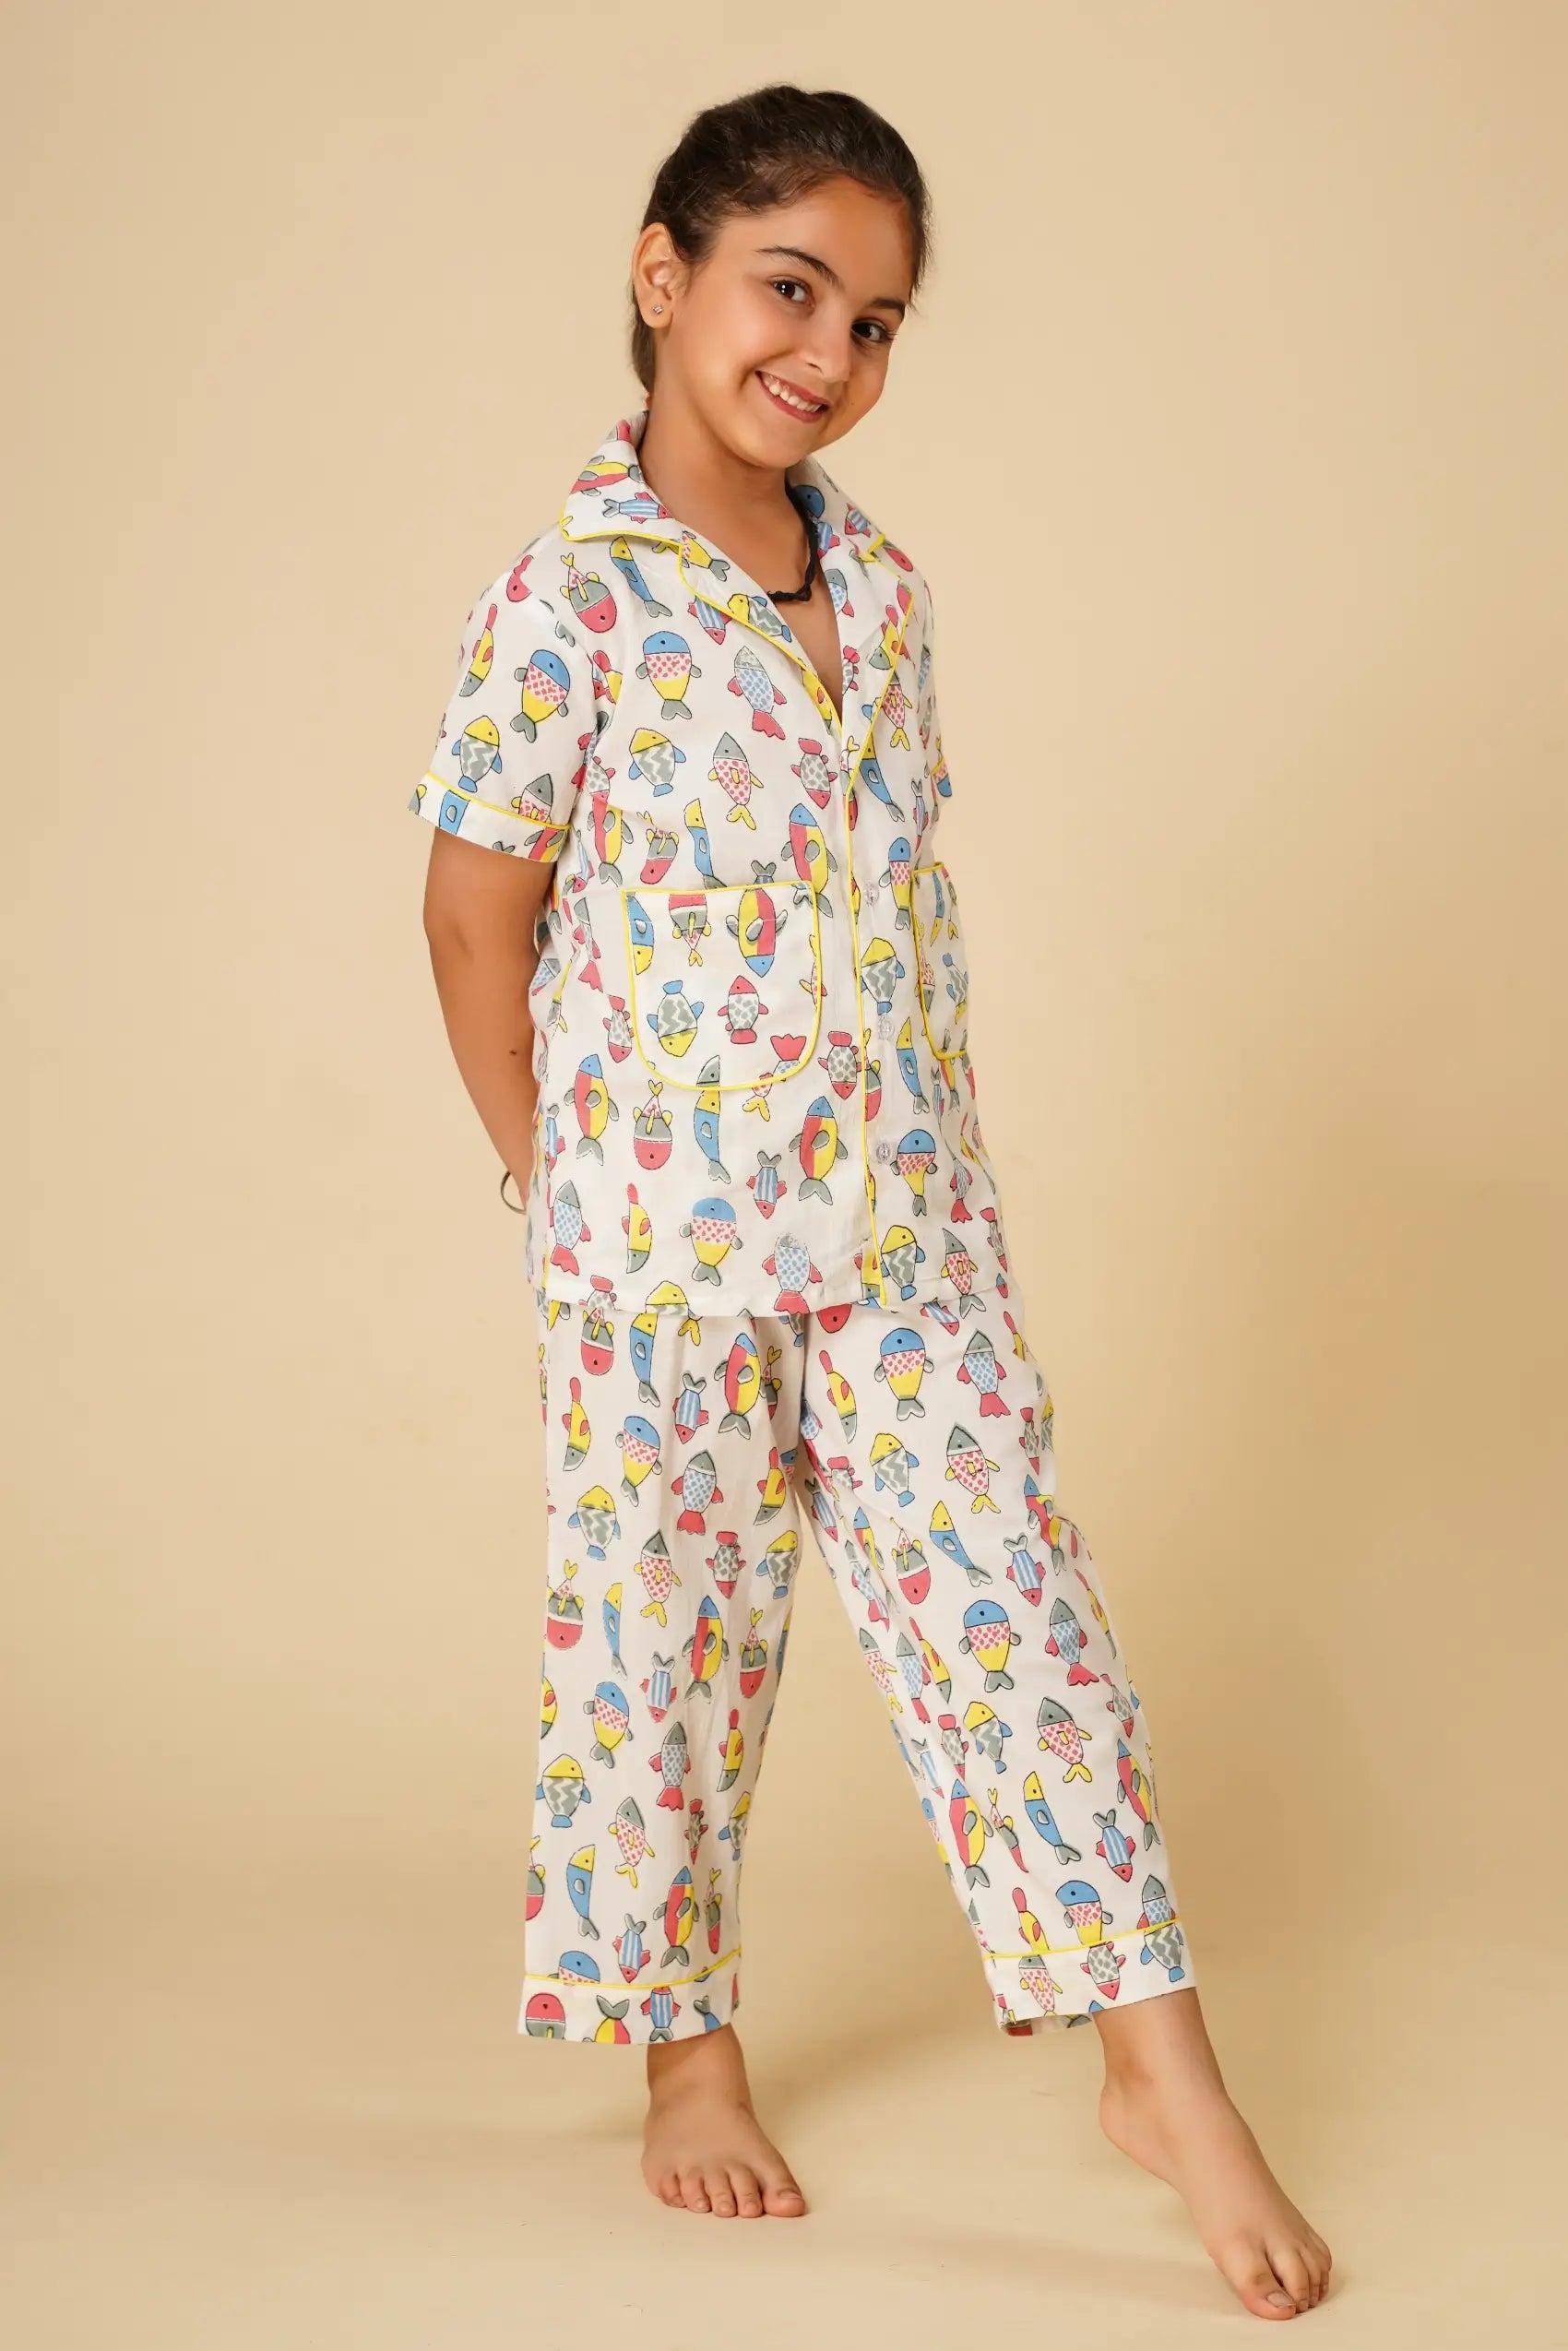 Fish print unisex nightsuit for kids - Set of two